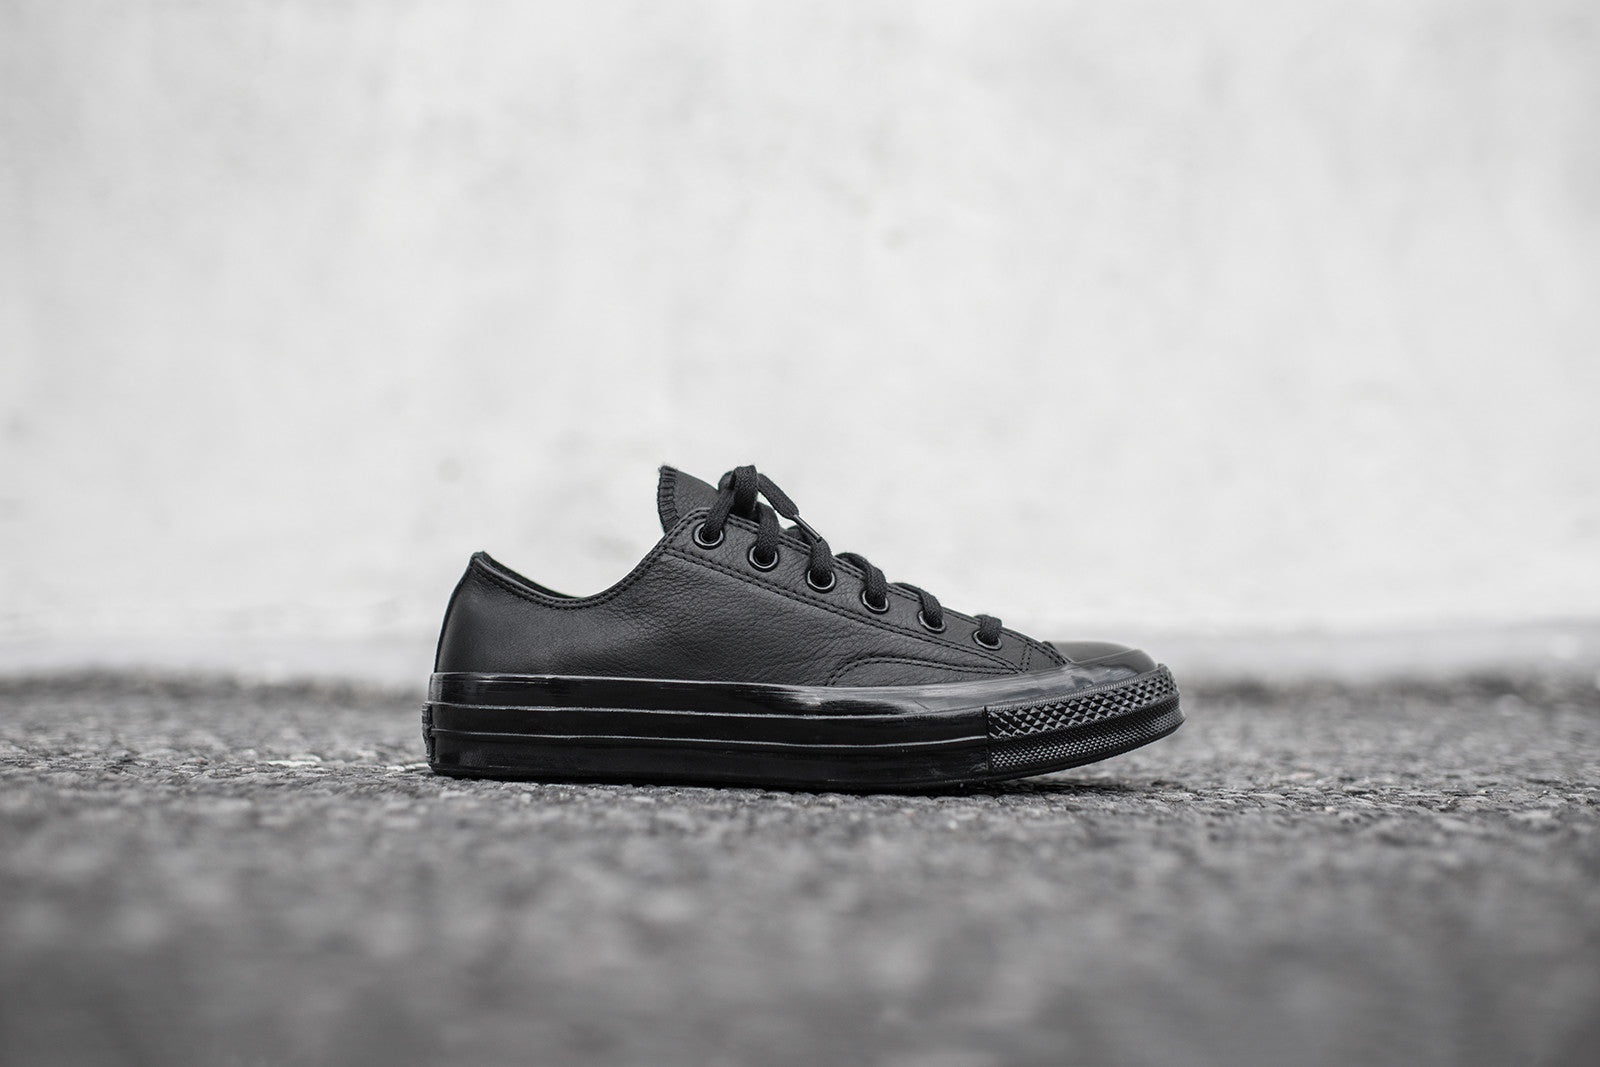 converse all star leather ox low black mono